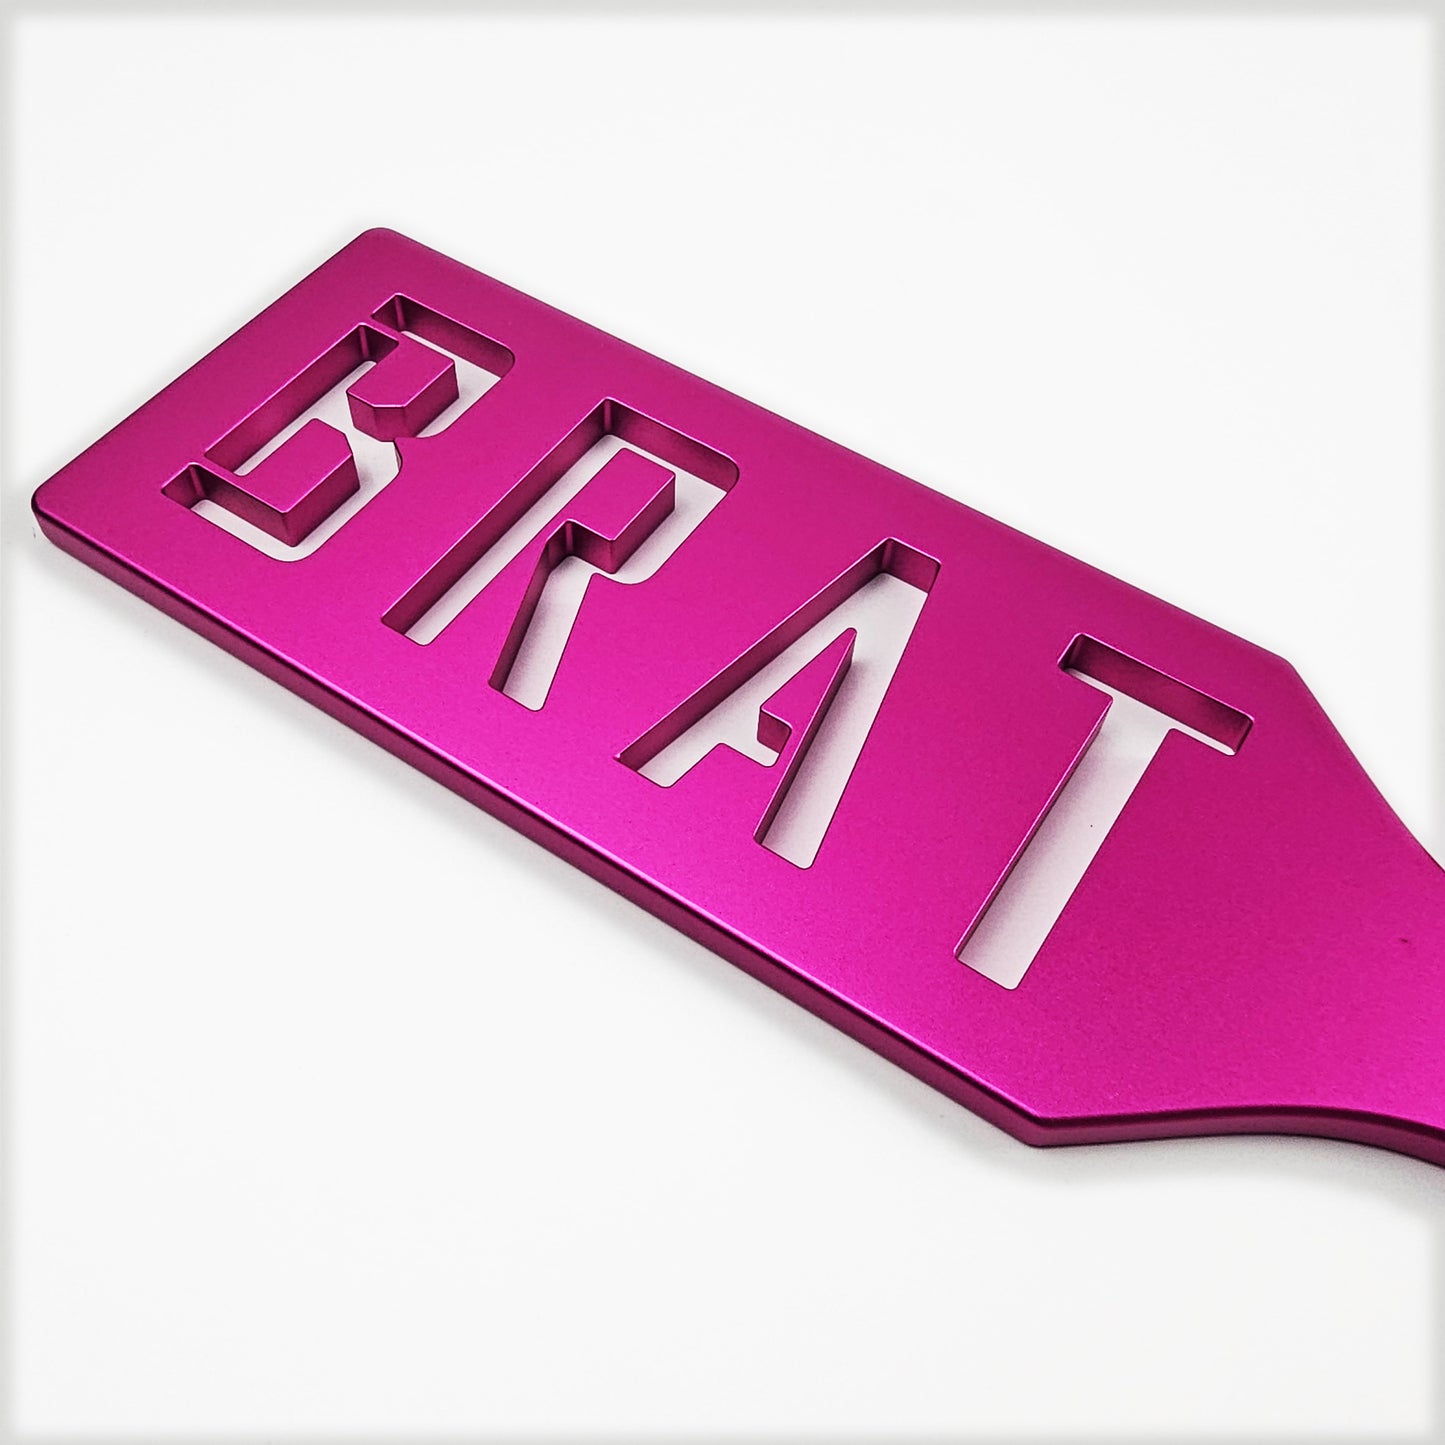 Pink Steel Spanking Paddle with BRAT cut out made by Brat Breakers